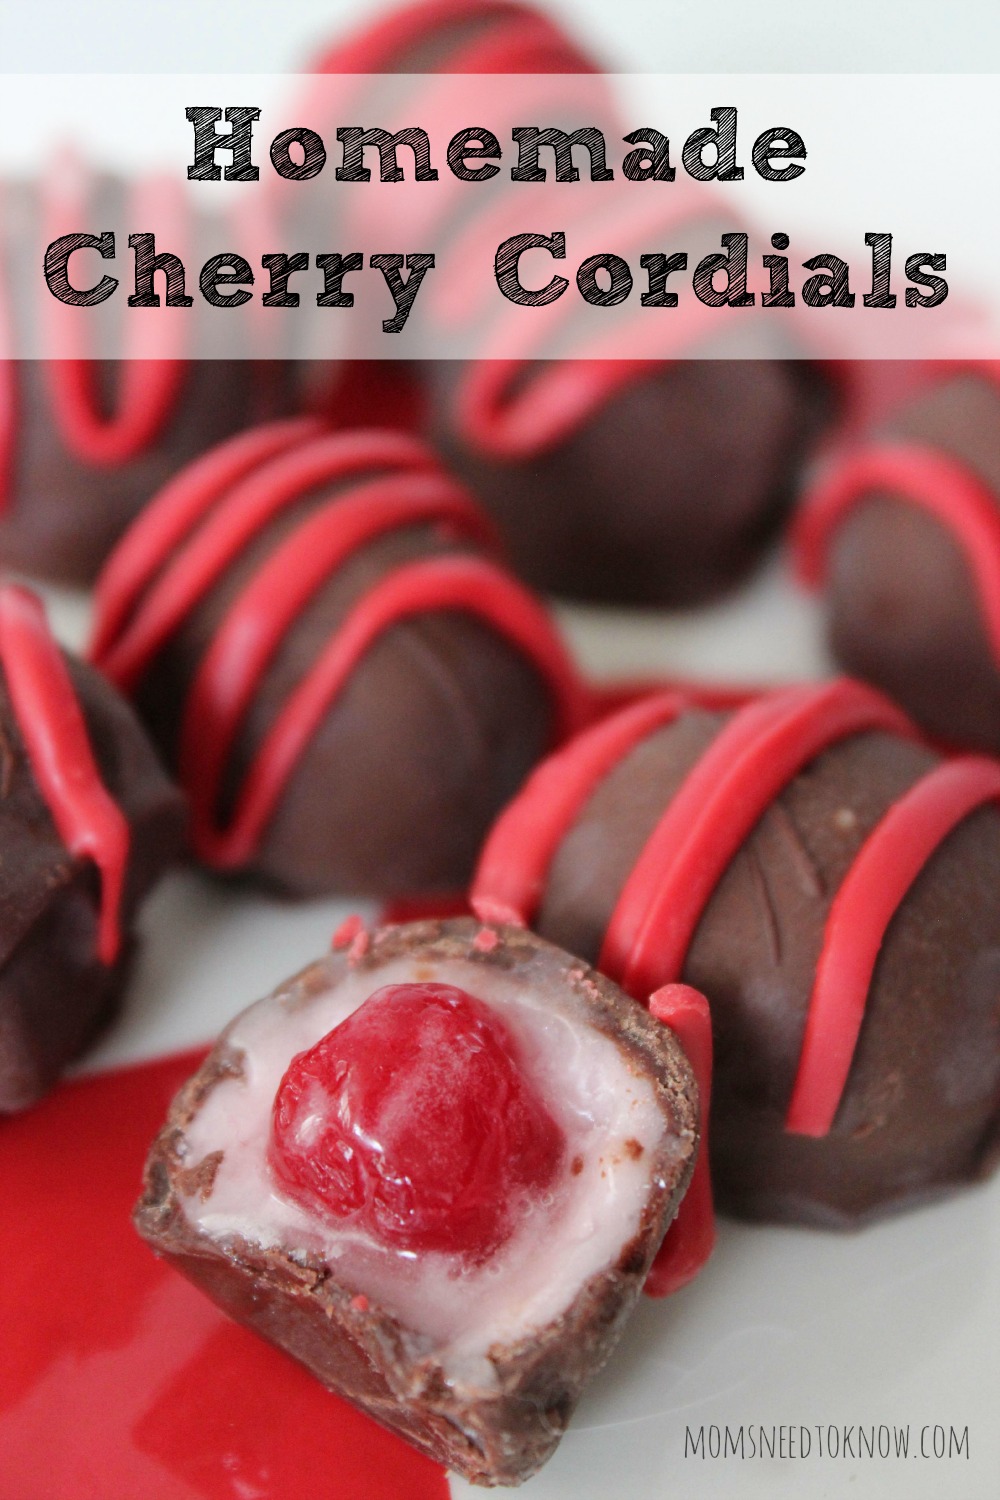 How To Make Homemade Cherry Cordials or Chocolate Covered Cherries